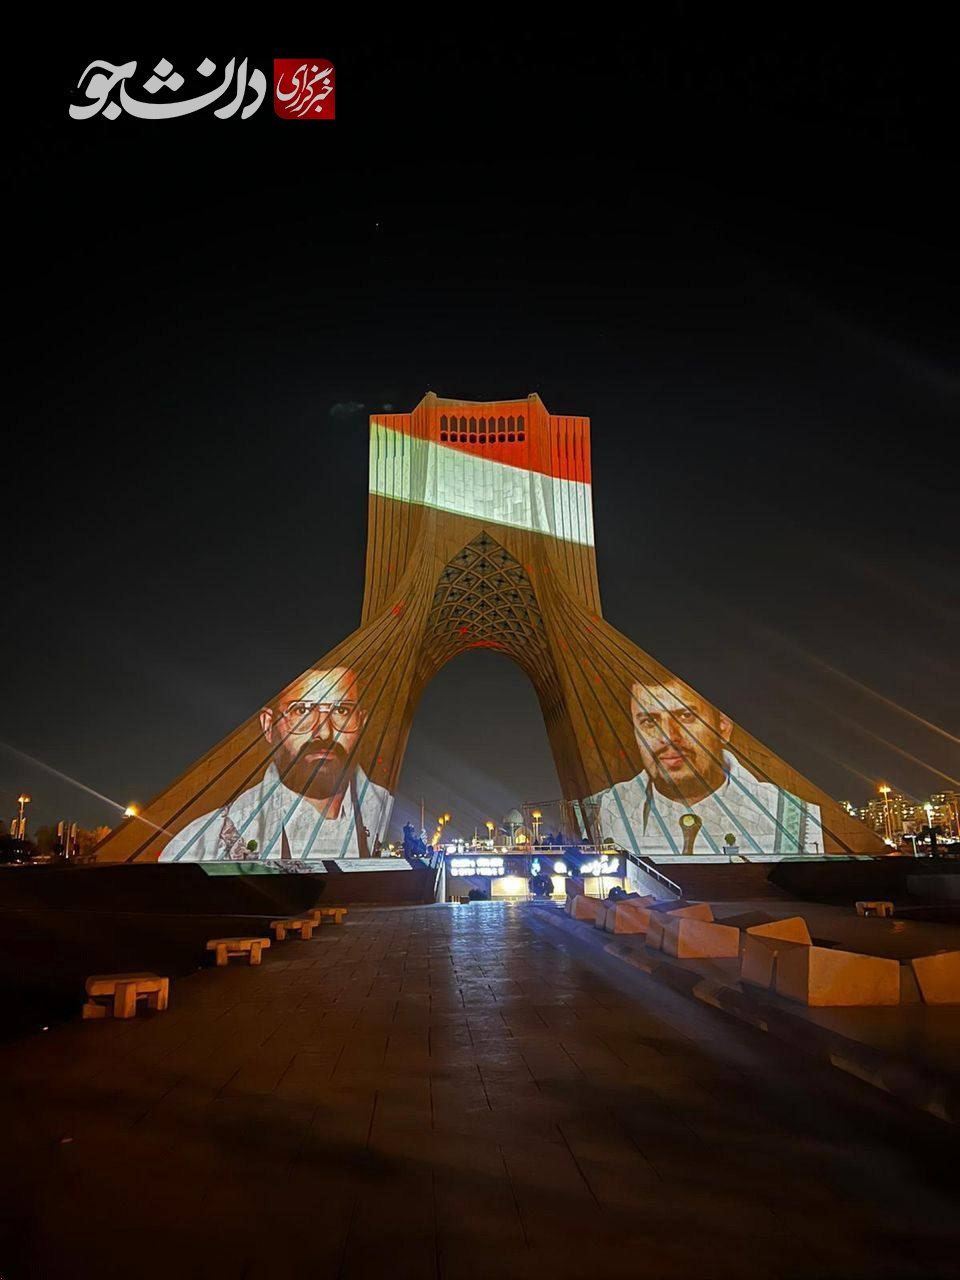 Pictures of the Houthi group's leaders were projected on Tehran's iconic Azadi Tower